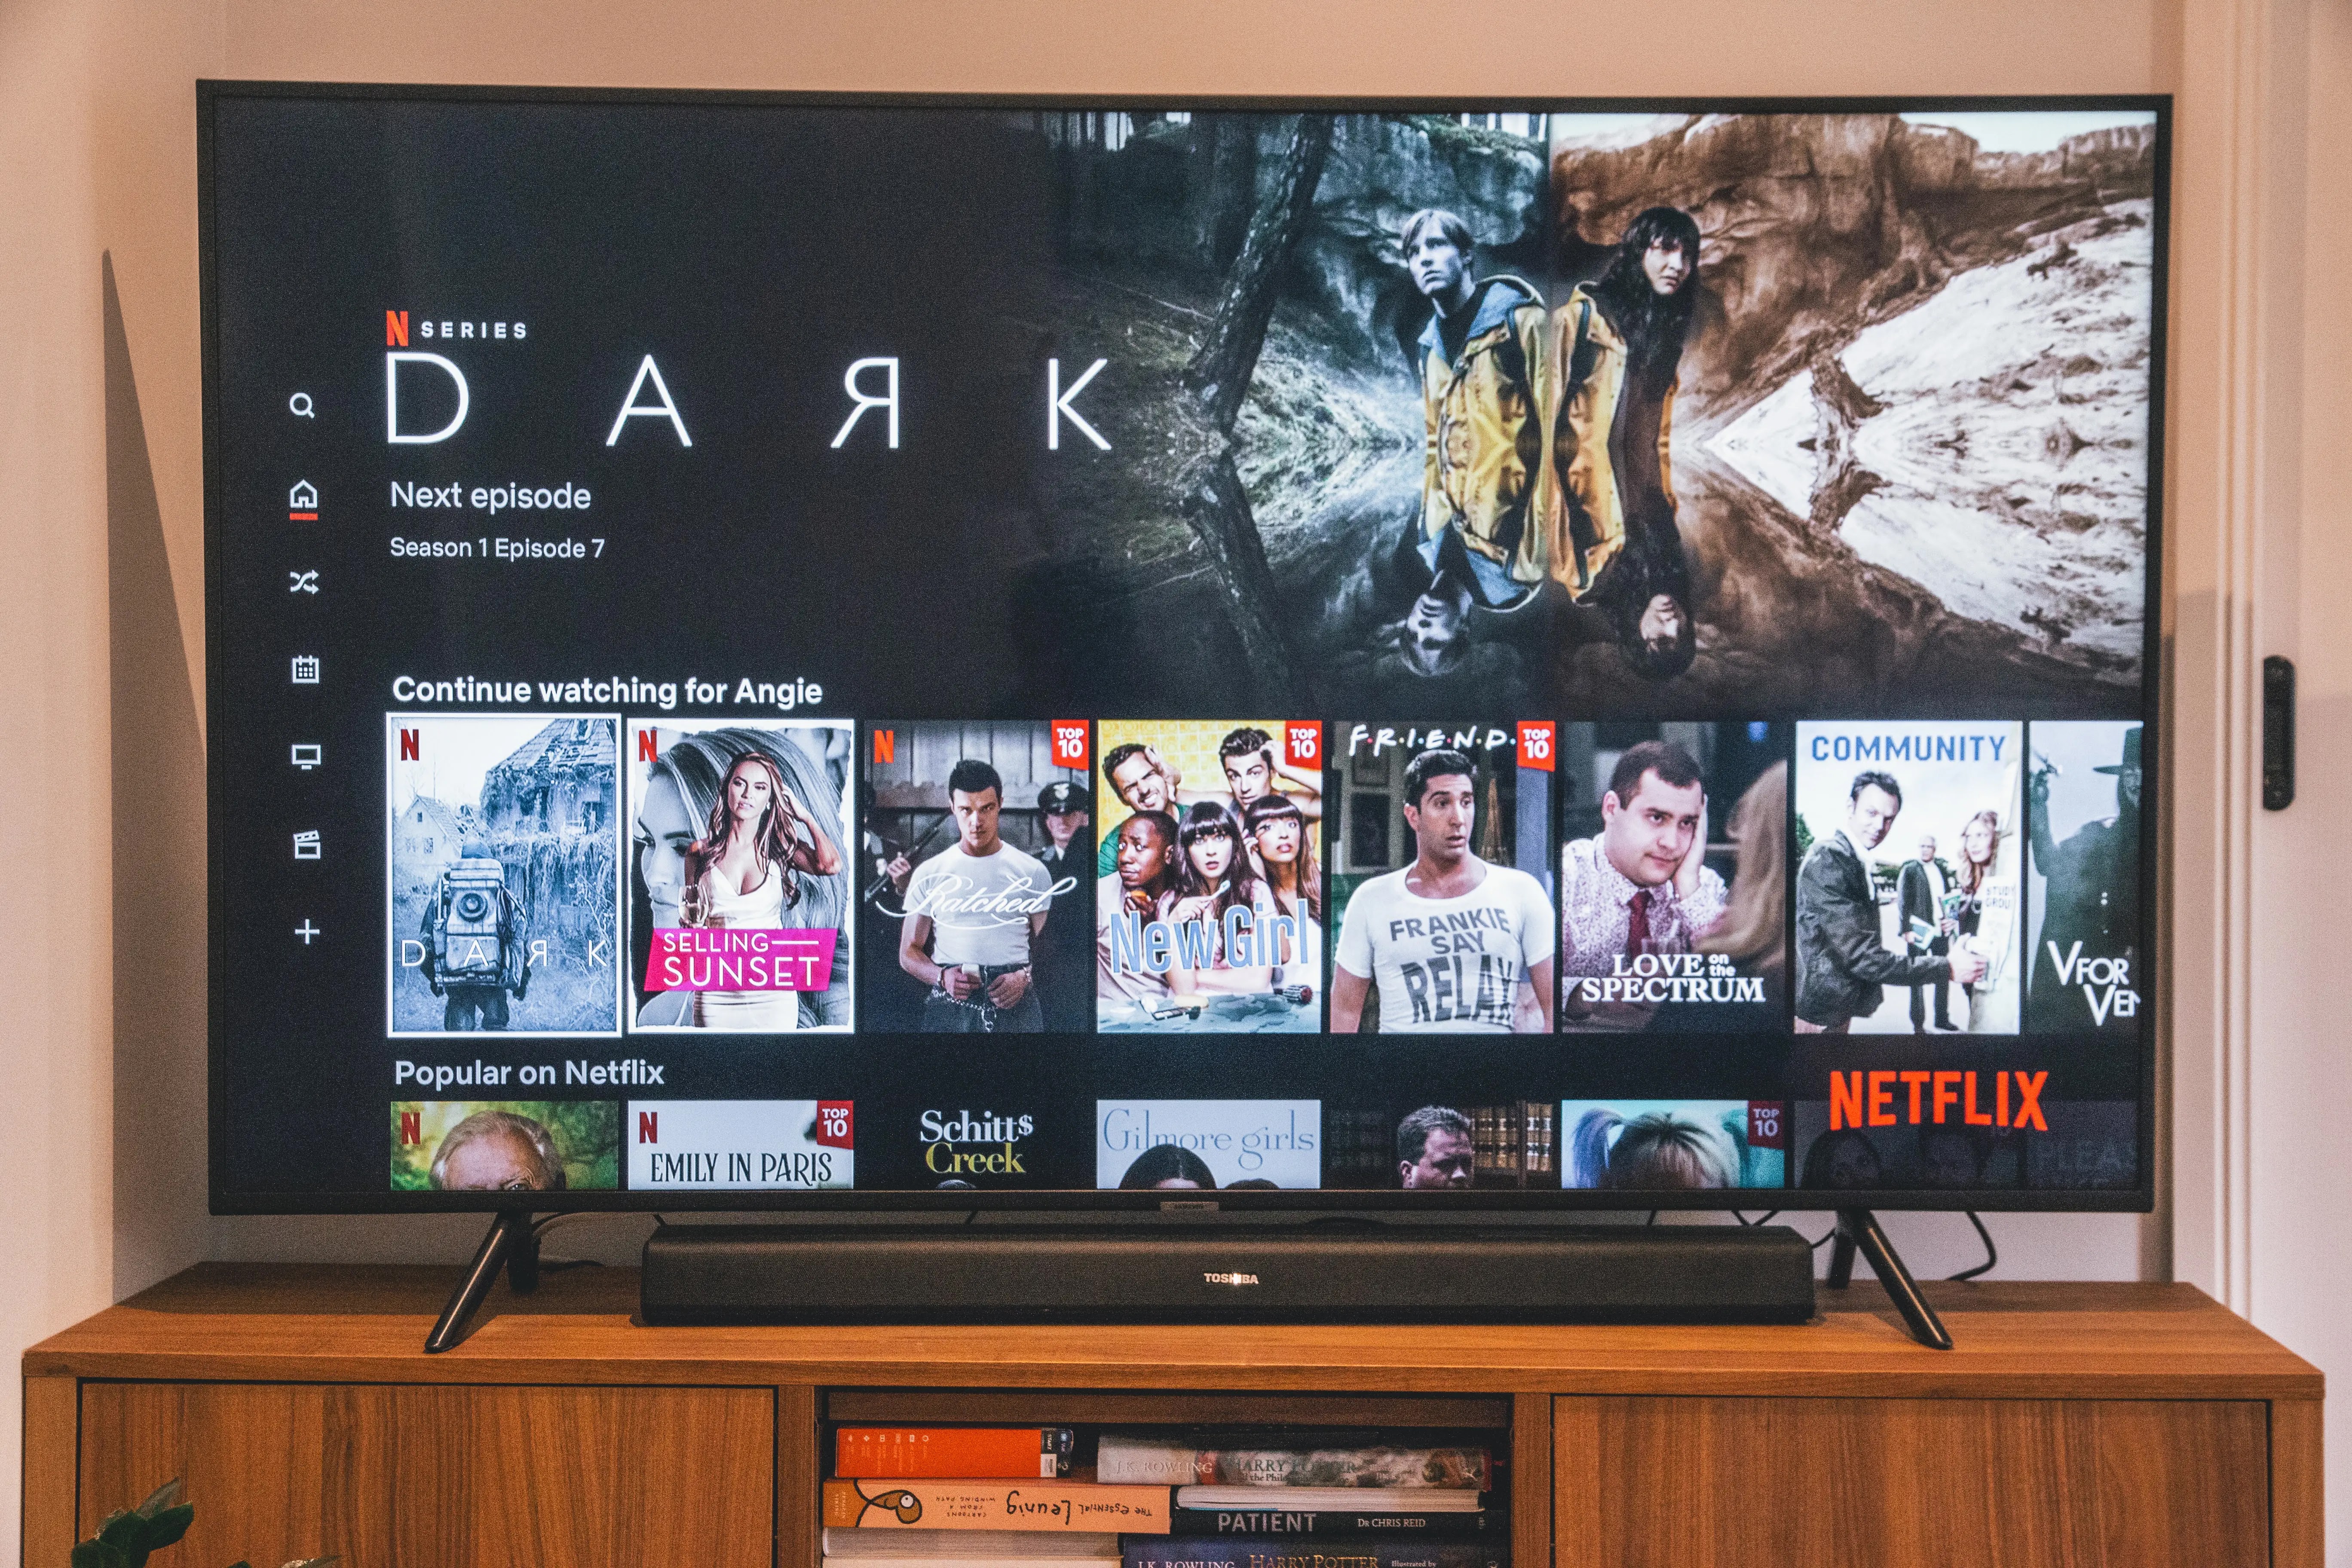 Is it worth buying a smart TV? 5 things the seller won't tell you